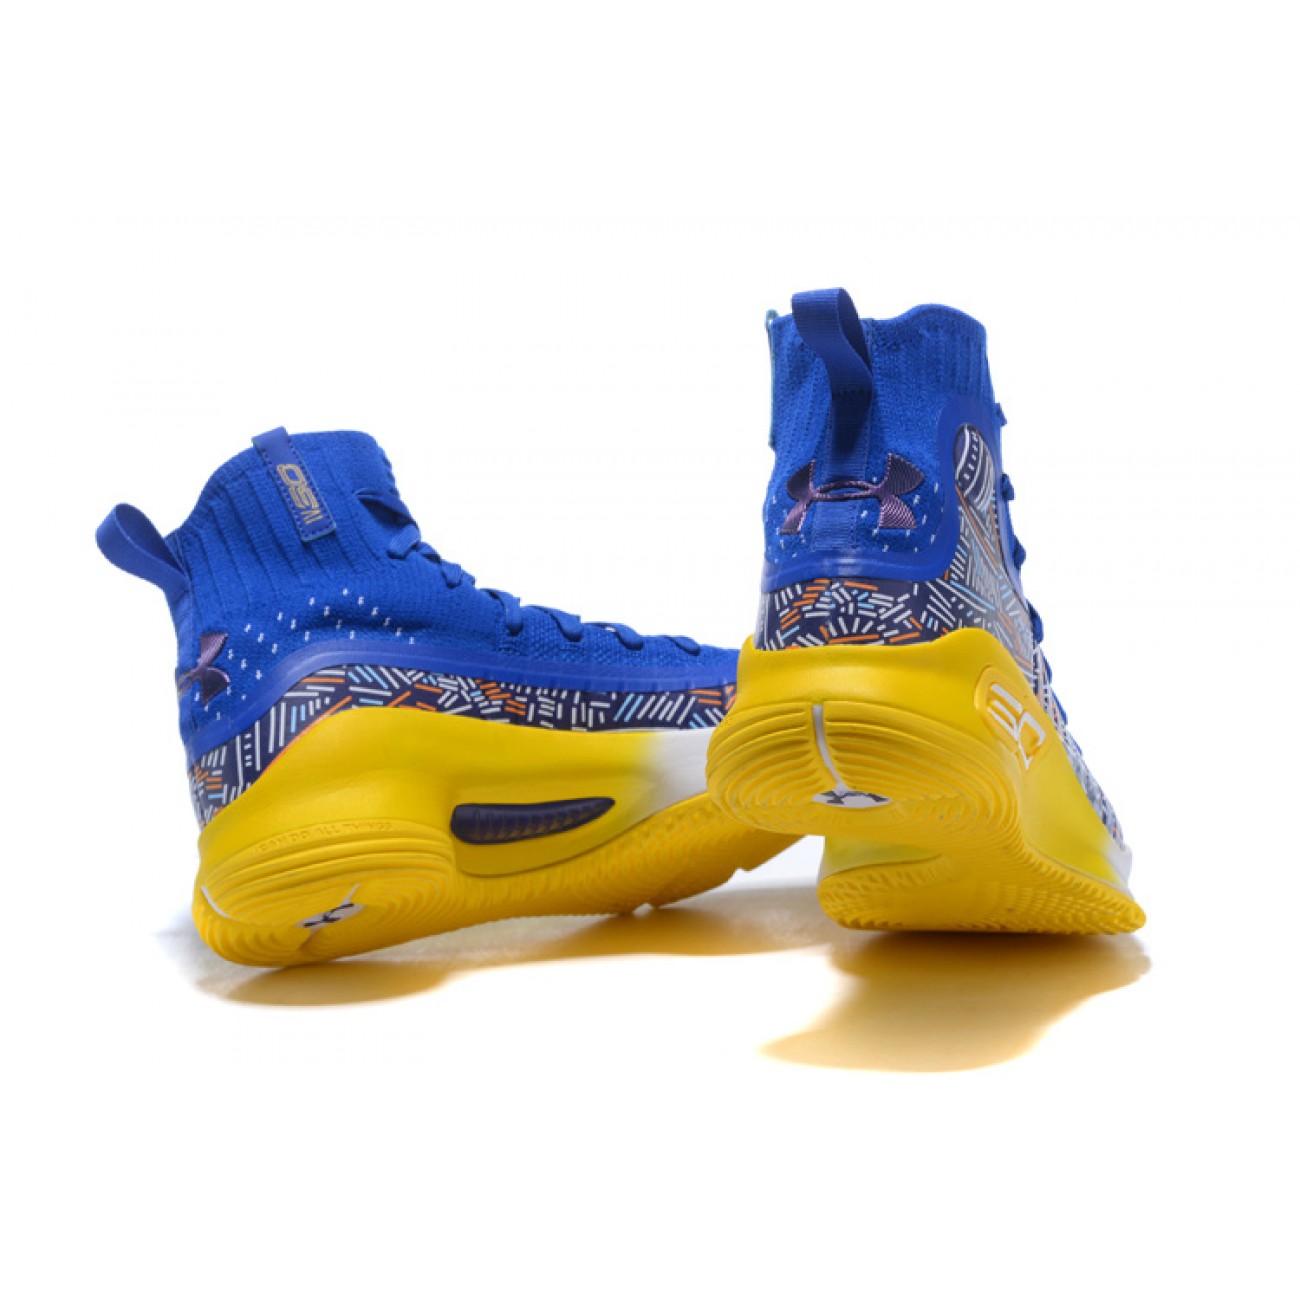 Under Armour UA Curry 4 Blue/Yellow